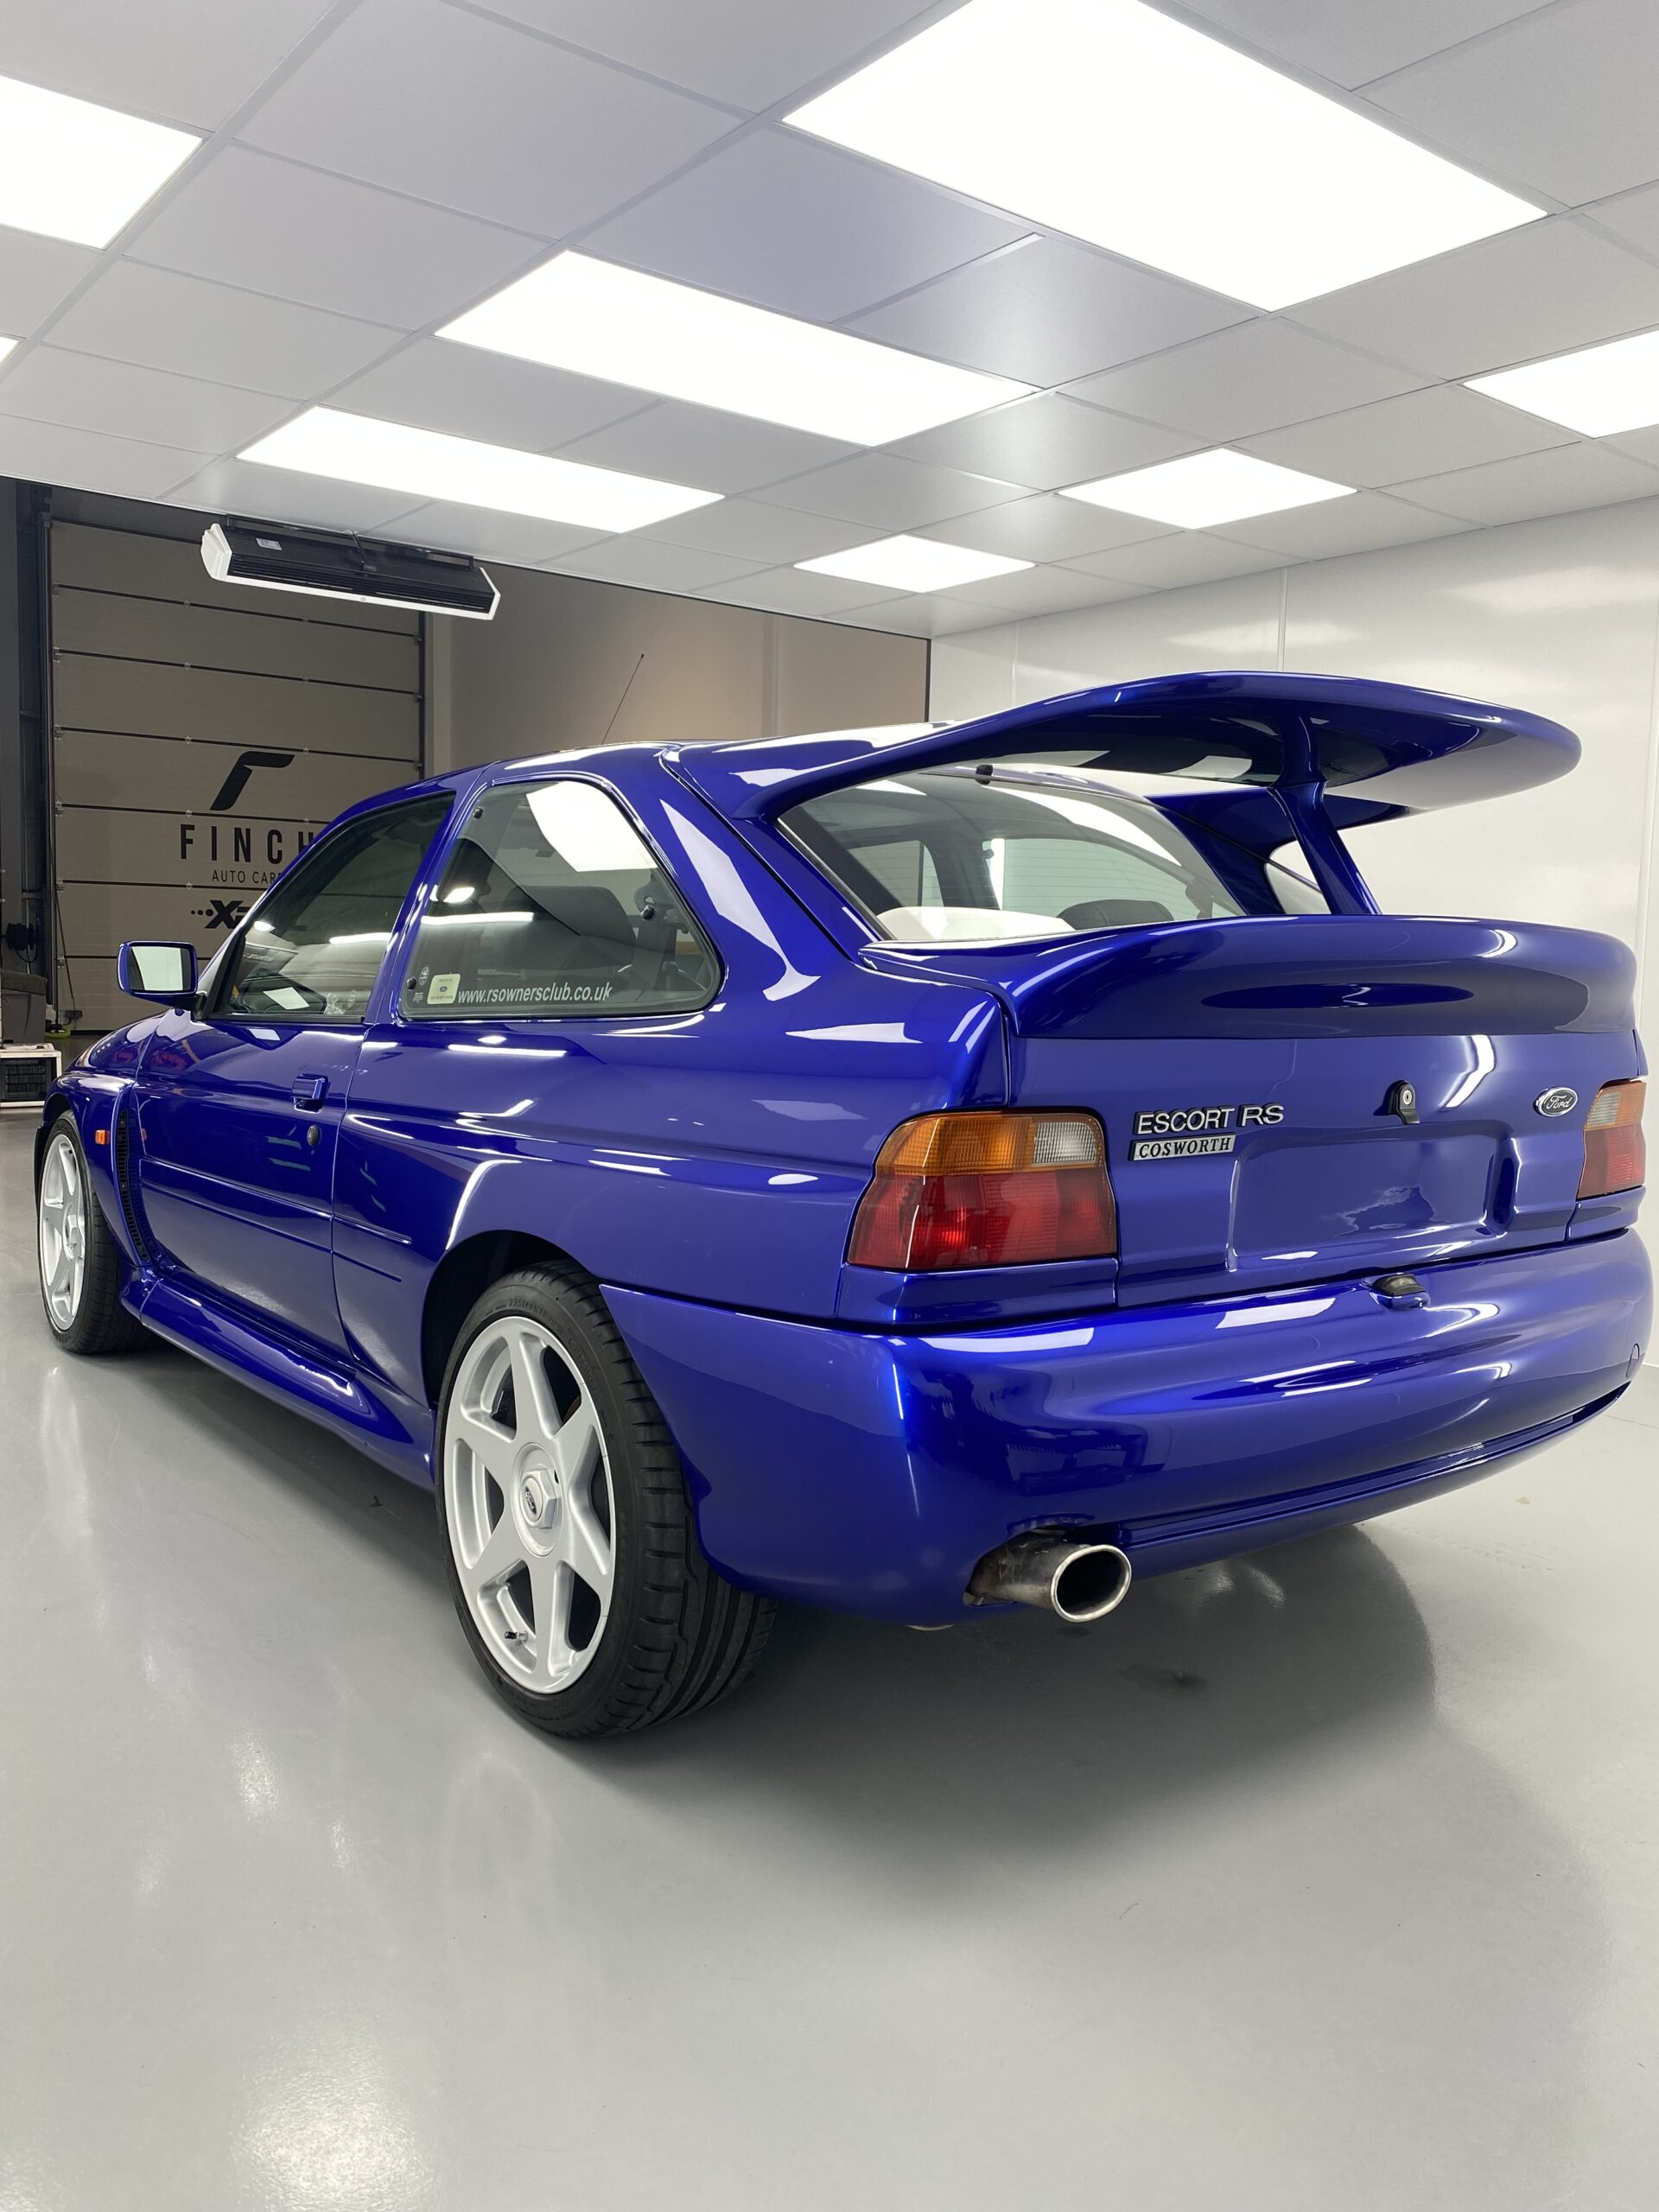 A blue ford escort rs cosworth with a large rear wing parked indoors.